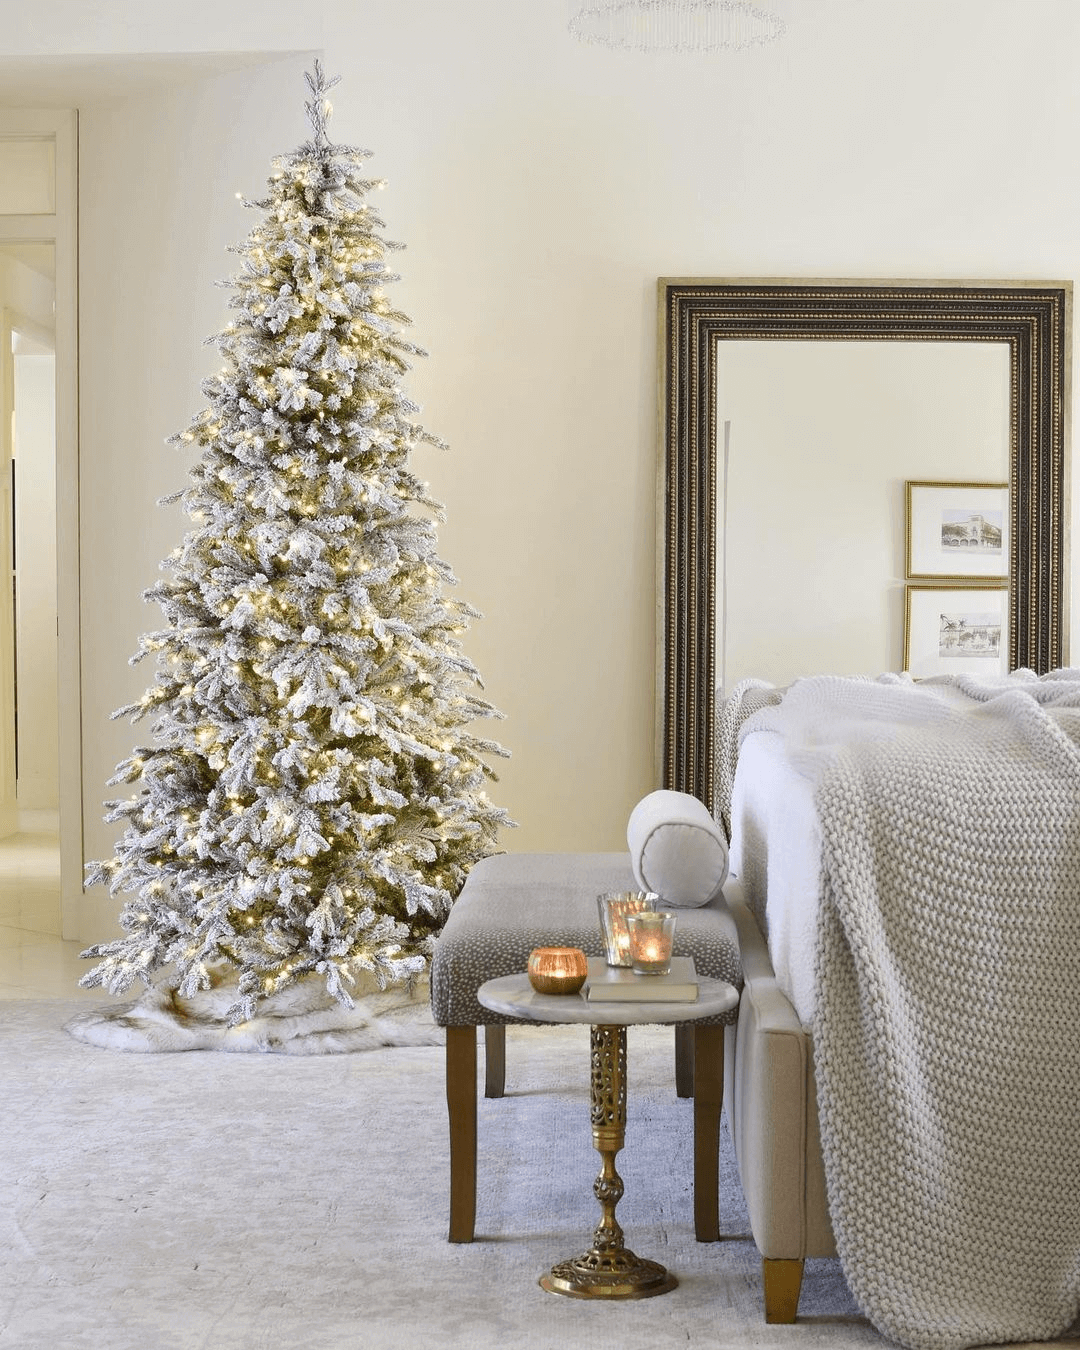 King of Christmas 9' Queen Flock® Slim Artificial Christmas Tree With 900 Warm White LED Lights